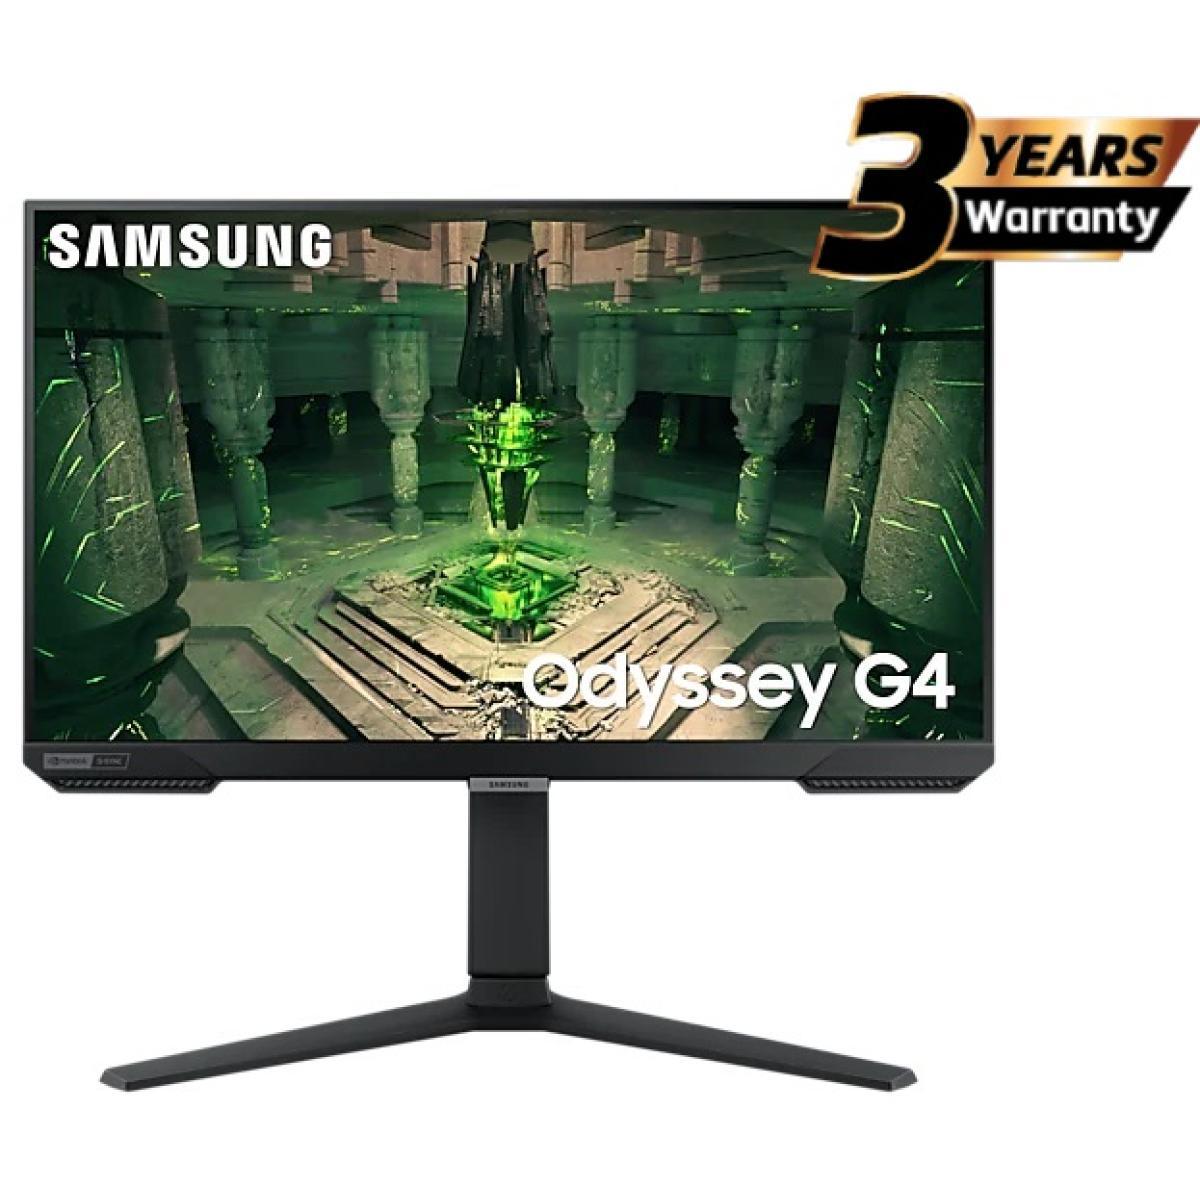 SAMSUNG Computer Monitors Samsung Odyssey G4 25" FHD Flat Monitor, IPS, 240Hz, 1ms(GTG) HDR10, 99% sRGB, G-Sync Compatible, UltraWide Game View ,w/ Ergonomic Stand